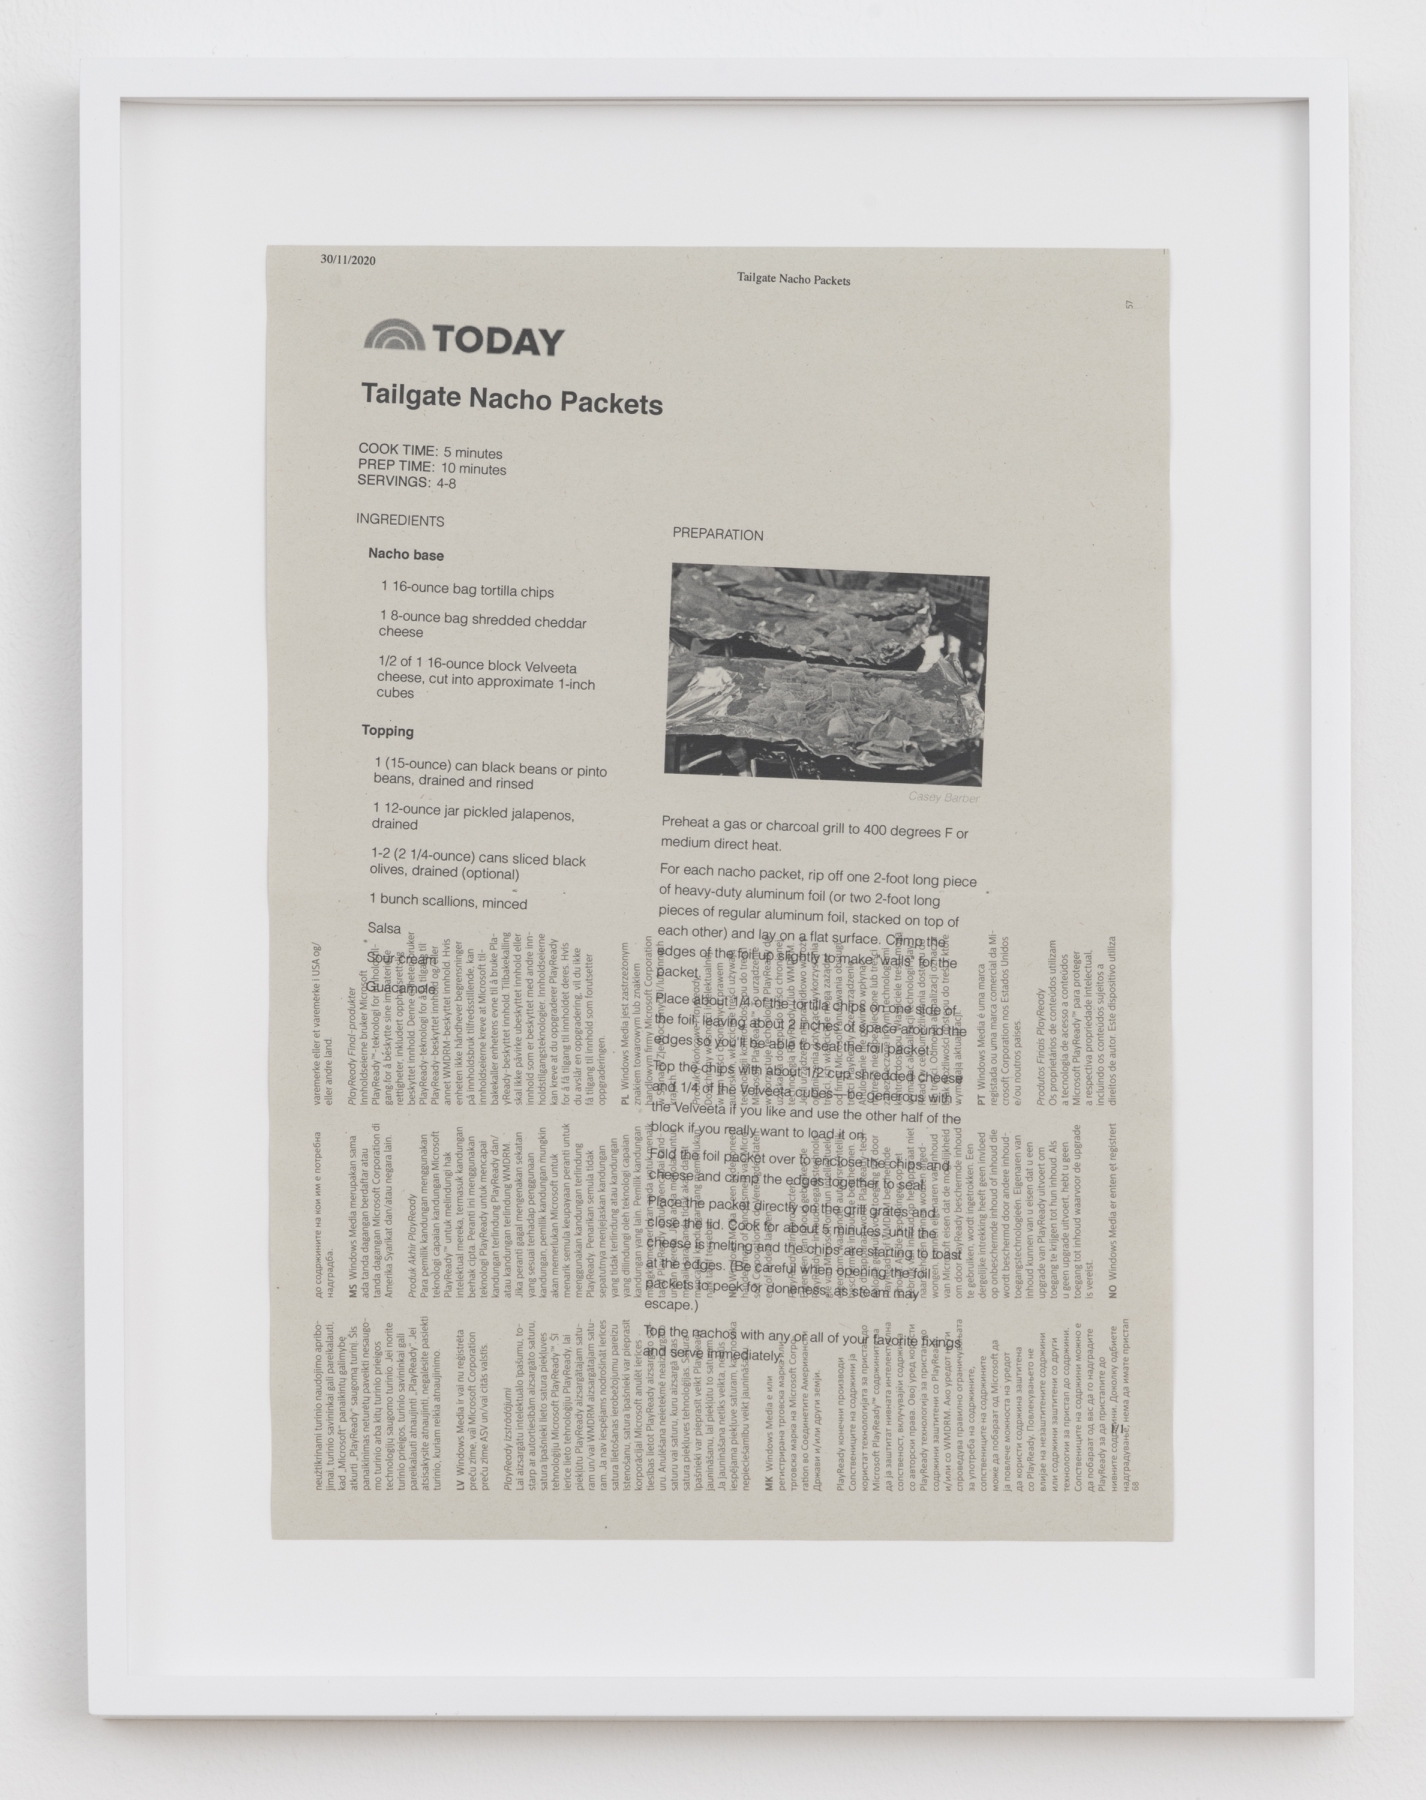 Cory Arcangel

TODAY: Tailgate Nacho Packets,&nbsp;2020

Hewlett packard home office Laserjet on found PHILIPS flatscreen LED technical manual page

Paper: 11 7/8 x 8 1/4 inches (30.2 x 21 cm)

Frame: 15 1/8 x 11 9/16 x 1 3/8 inches (38.4 x 29.4 x 3.5 cm)